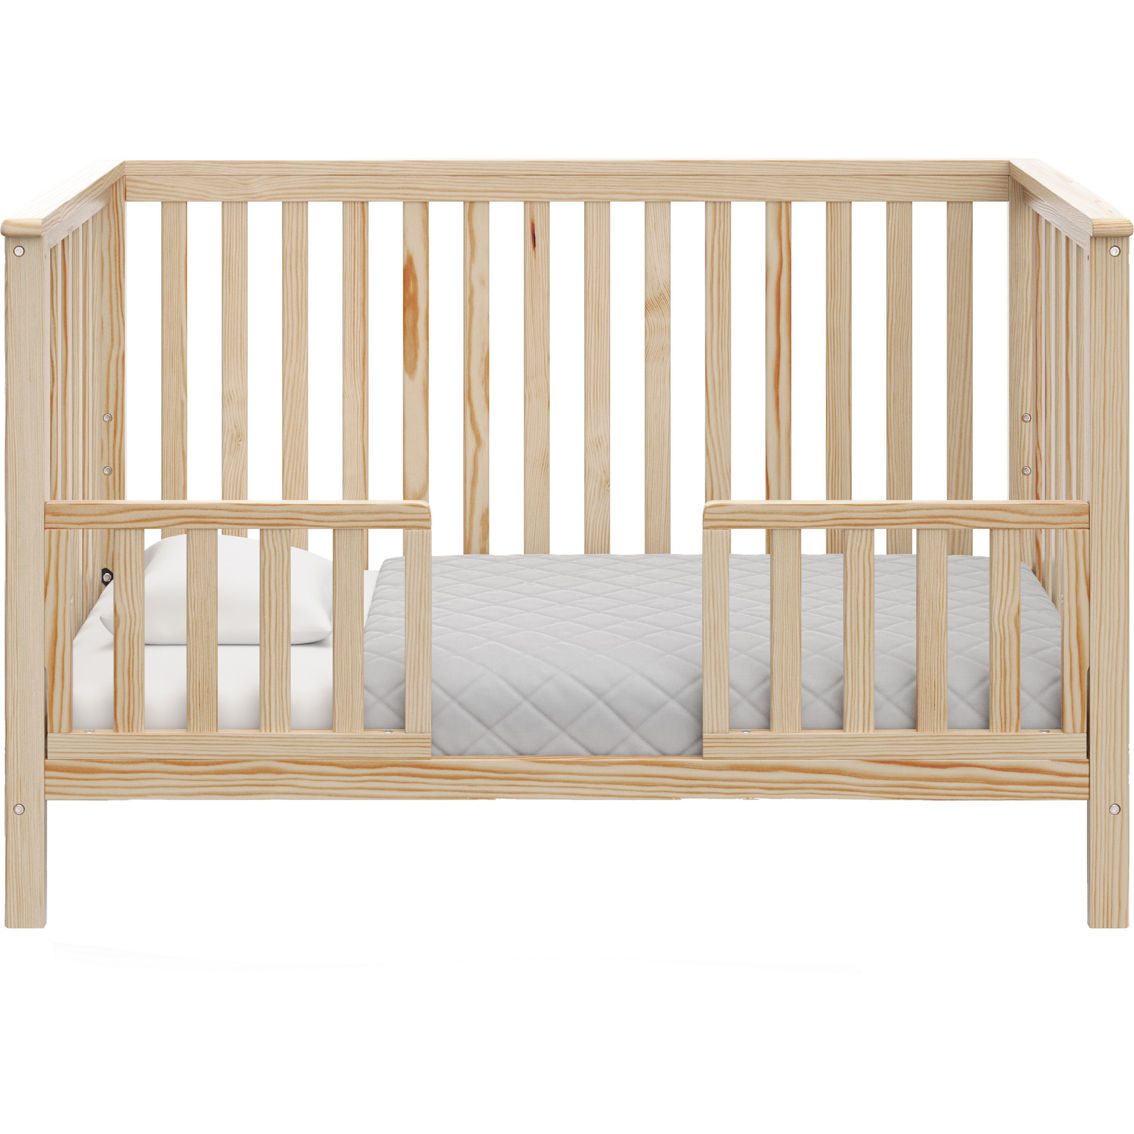 Storkcraft Hillcrest 4-in-1 Convertible Crib - Natural - Image 5 of 7